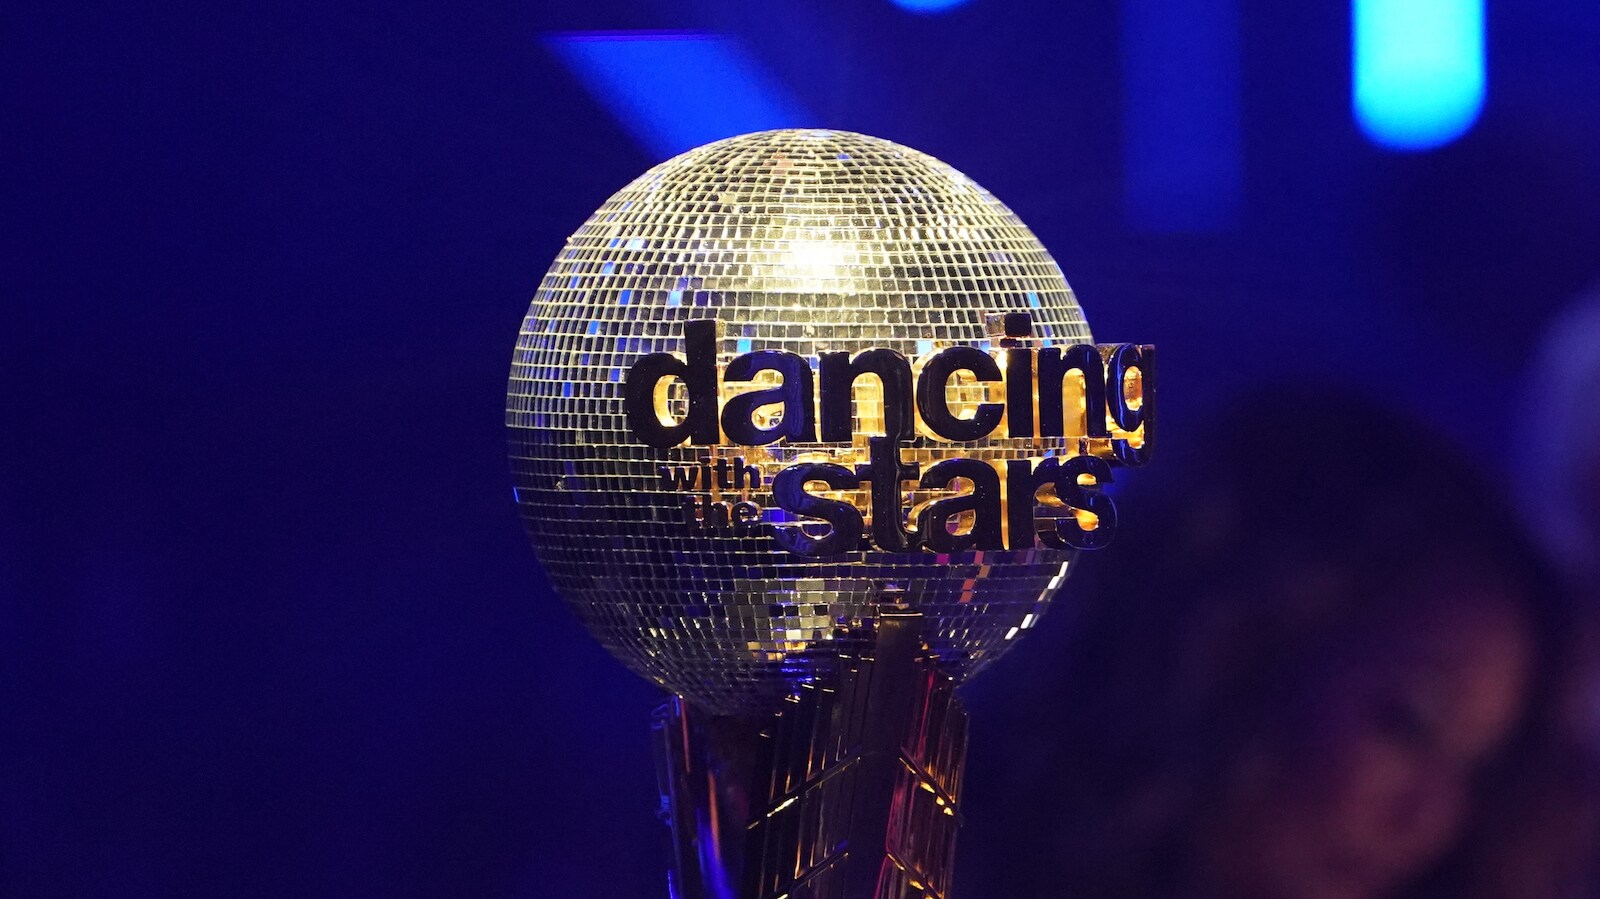 DANCING WITH THE STARS - “Finale” – The four finalists perform their final two routines in hopes of winning the mirrorball trophy. Each couple will perform a redemption dance and an unforgettable freestyle routine. A new episode of “Dancing with the Stars” will stream live MONDAY, NOV. 21 (8:00pm ET / 5:00pm PT), on Disney+. (ABC/Eric McCandless) DANCING WITH THE STARS